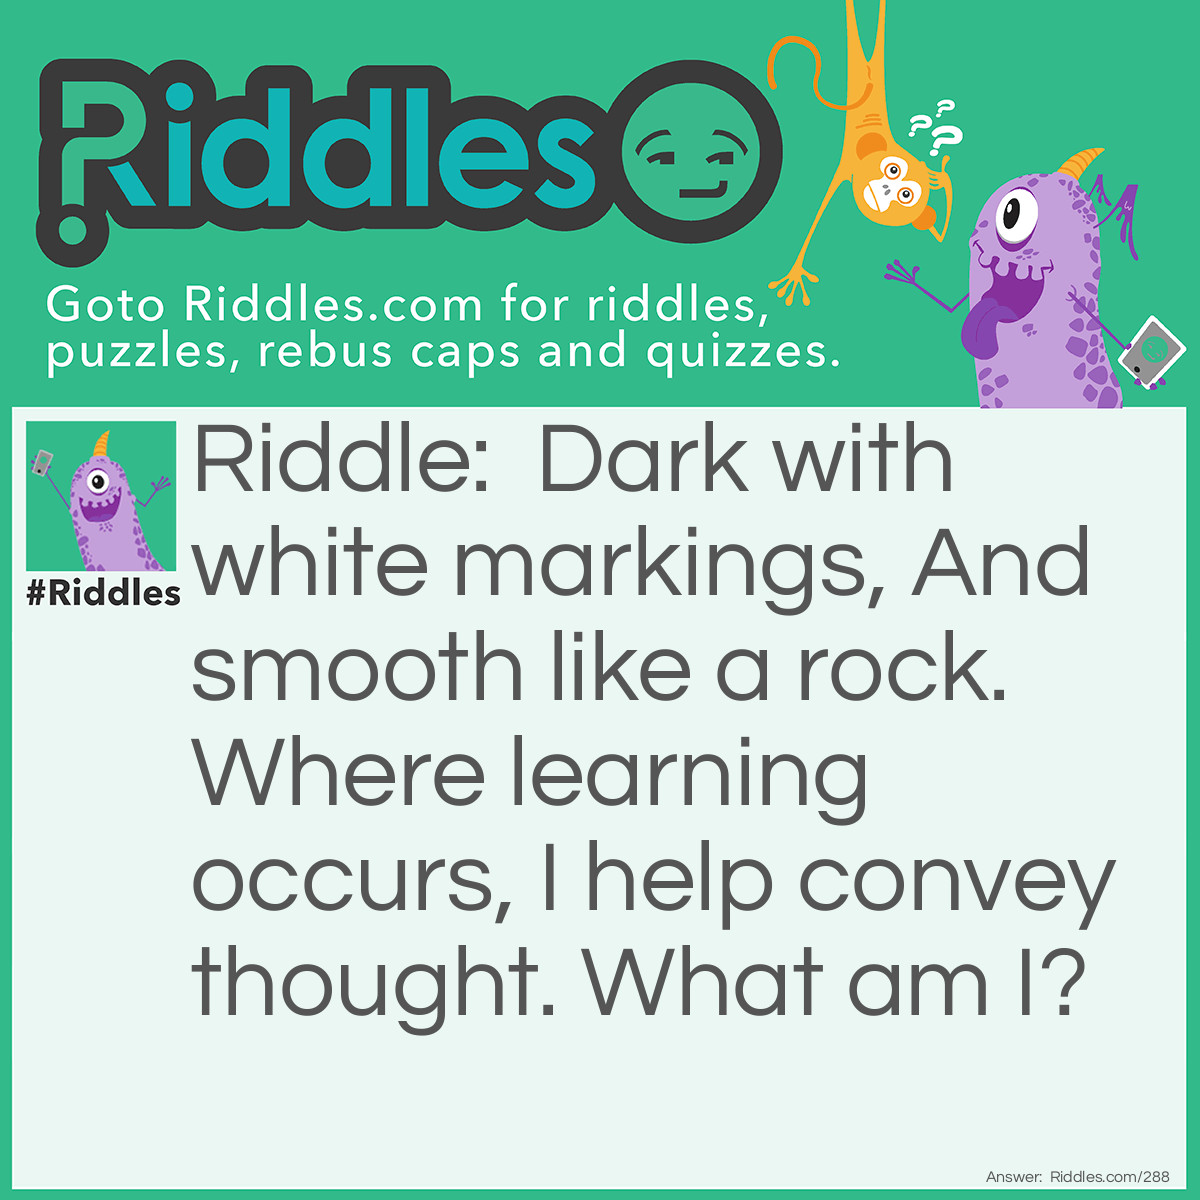 Riddle: Dark with white markings, And smooth like a rock. Where learning occurs, I help convey thought. What am I? Answer: Blackboard/chalkboard.